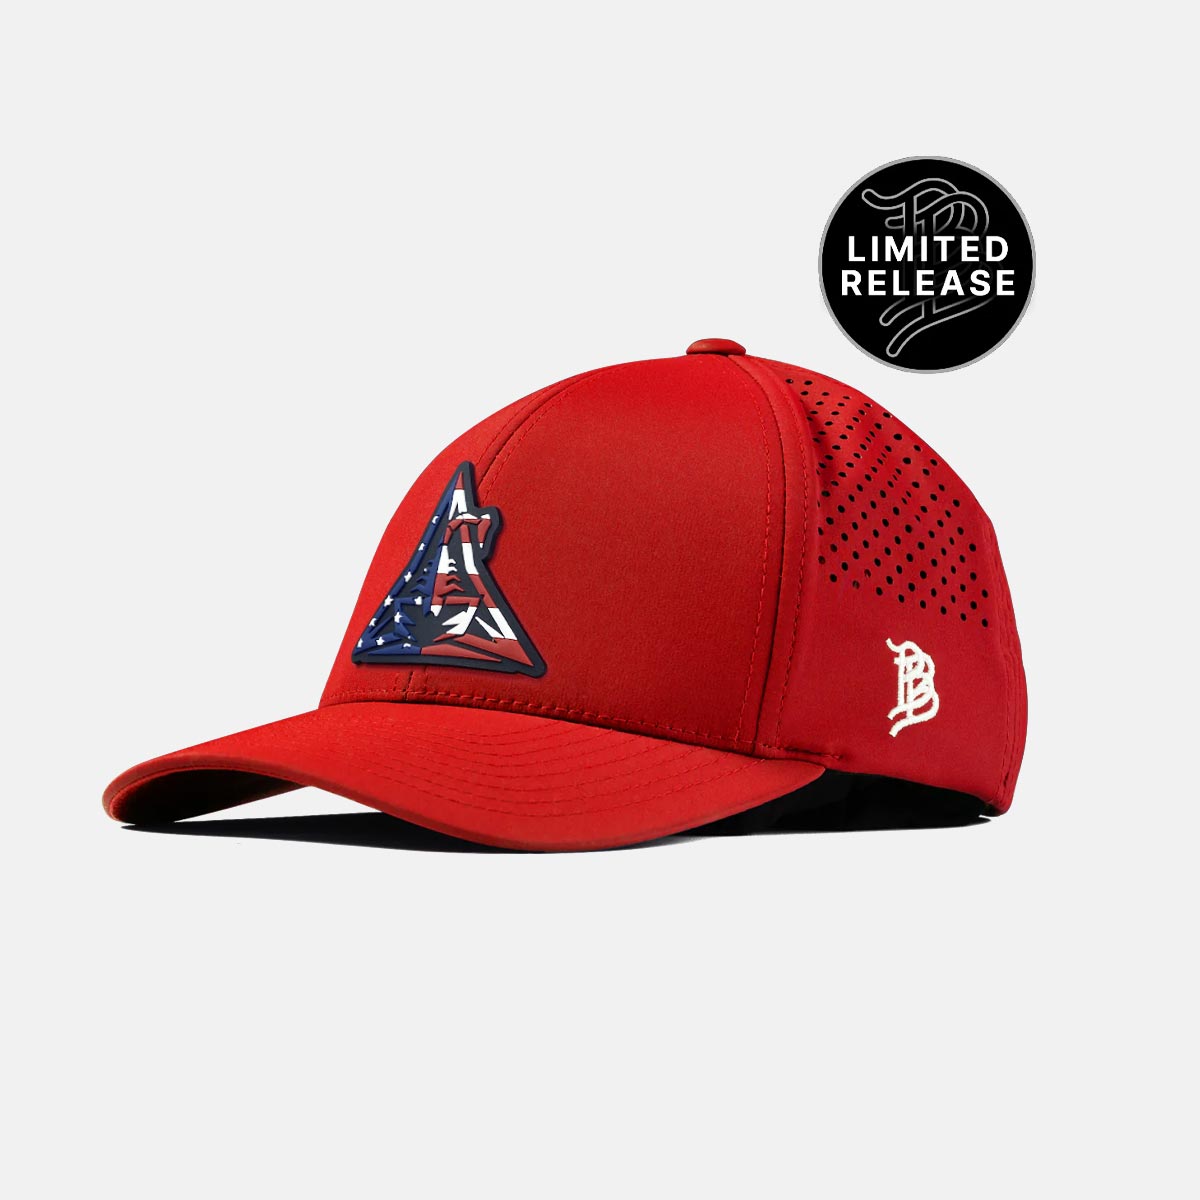 RISE Performance Curved Structured Hat - Red